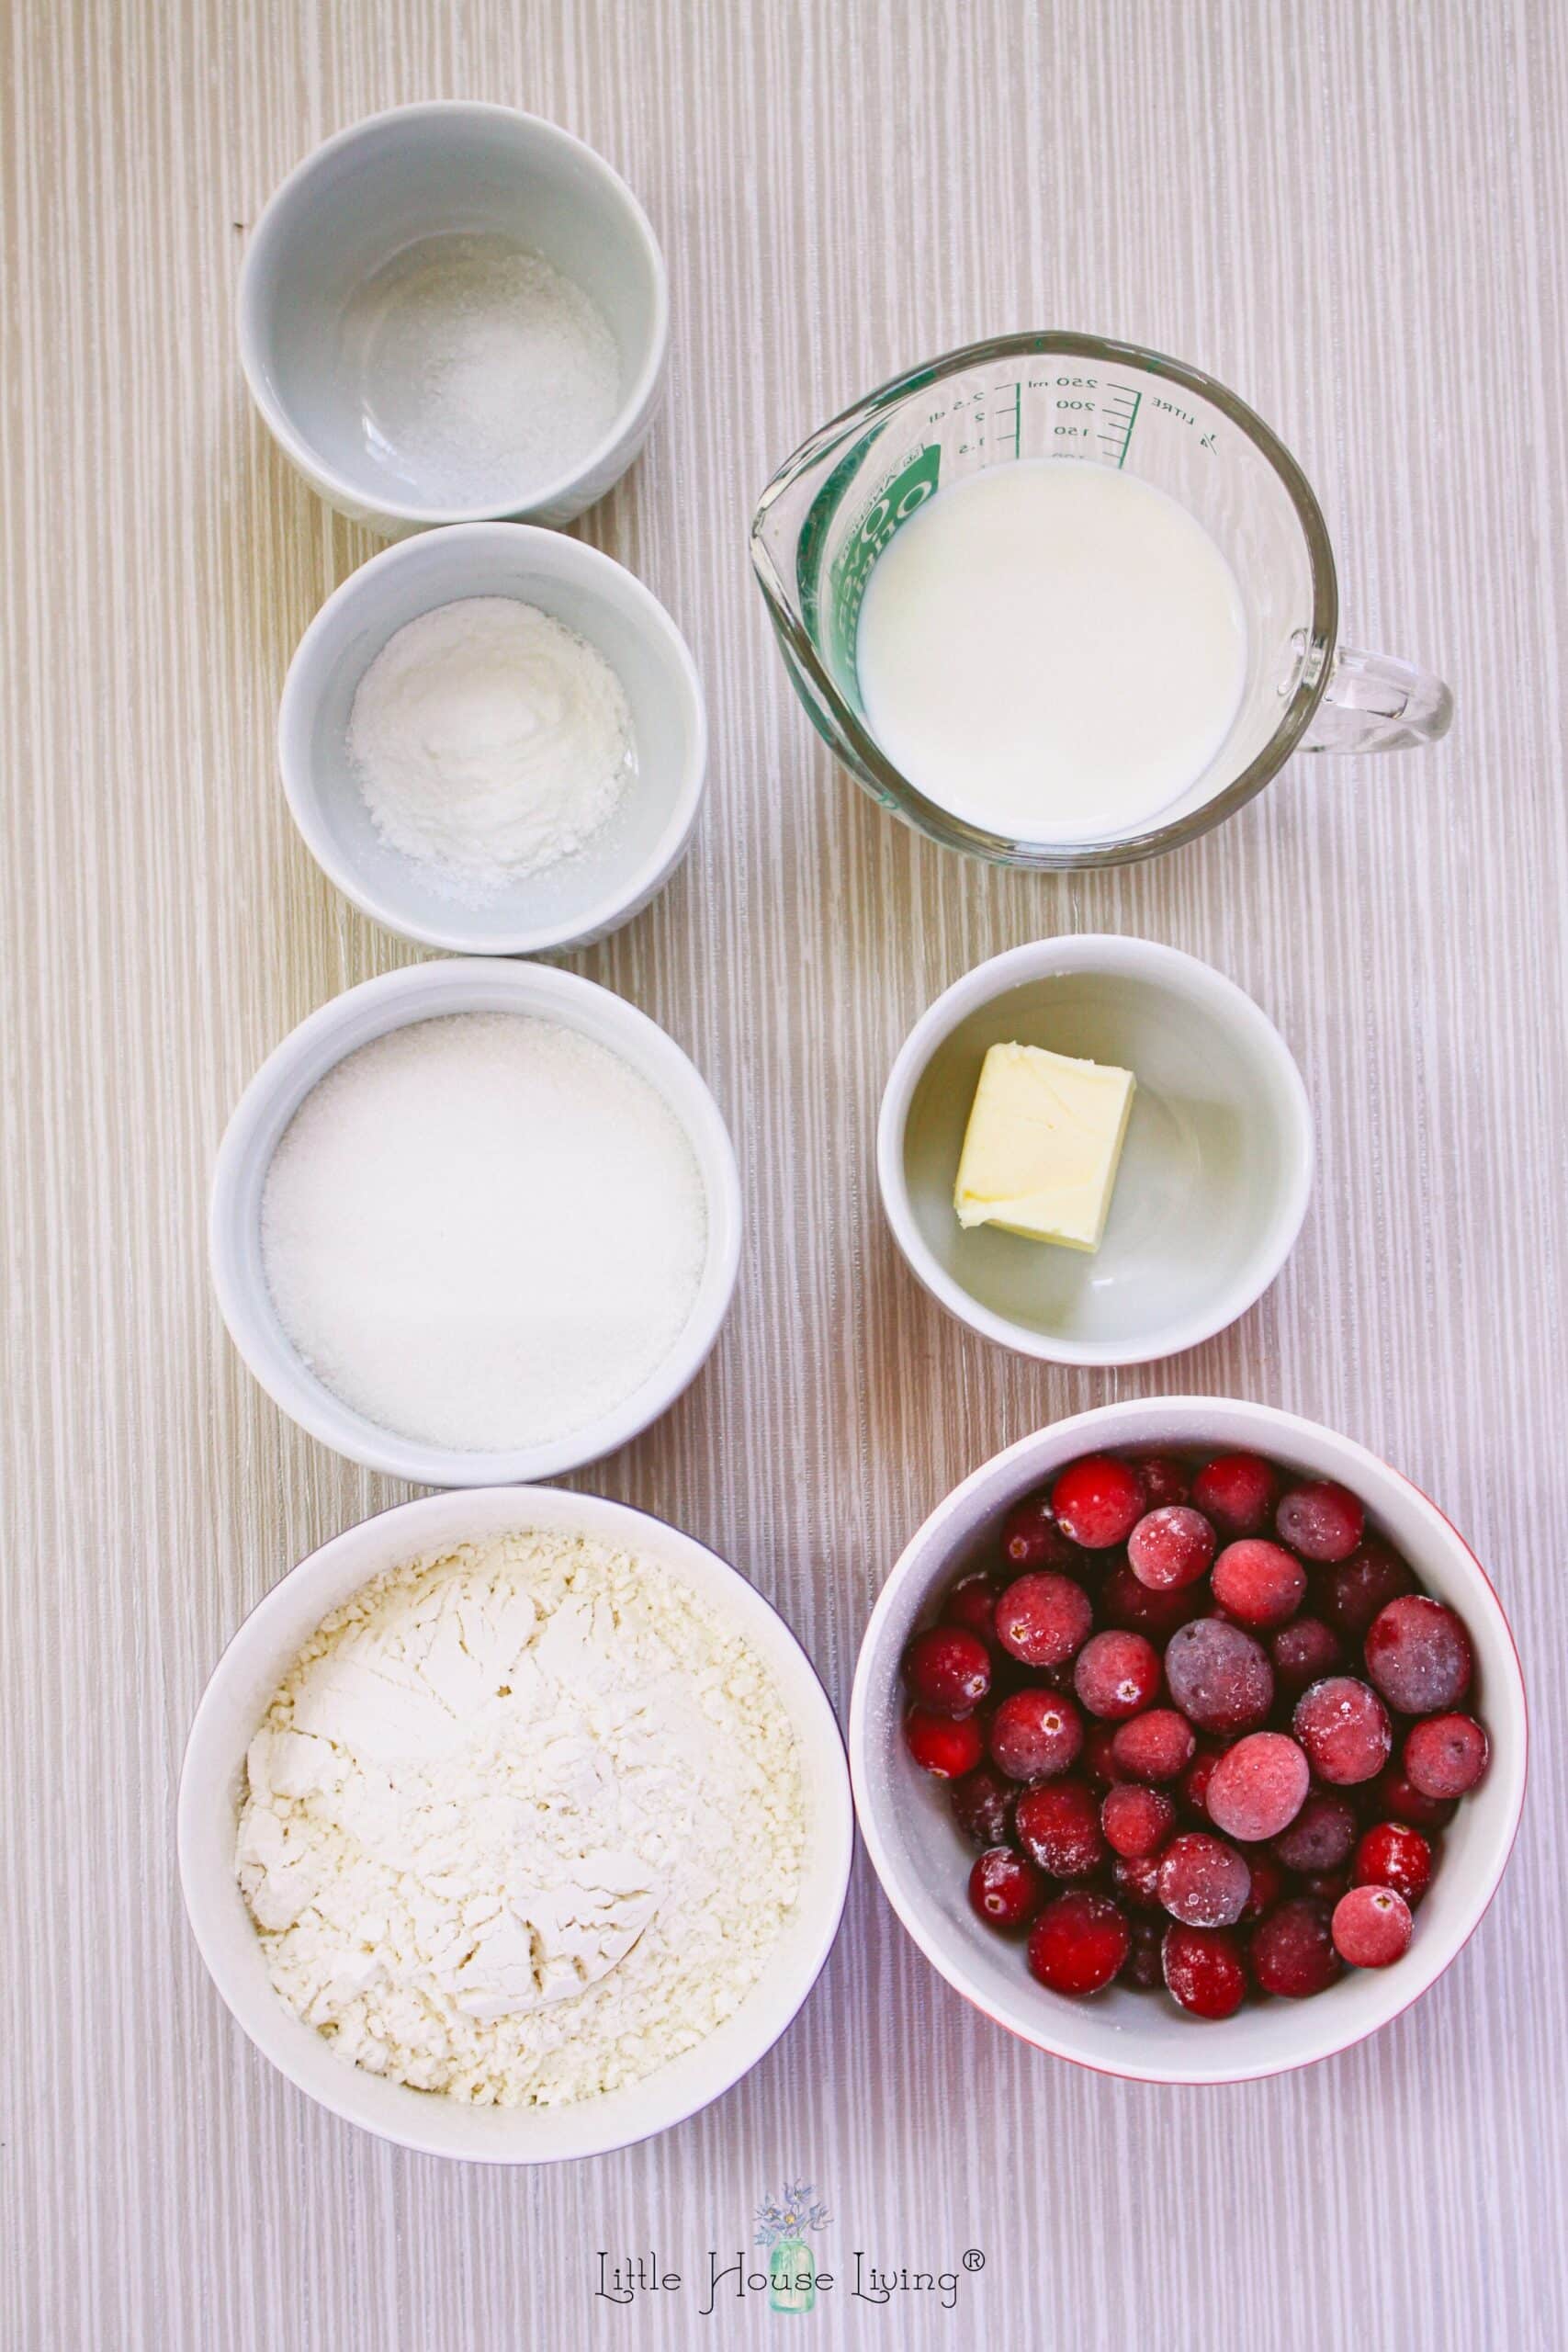 Ingredients for the cake